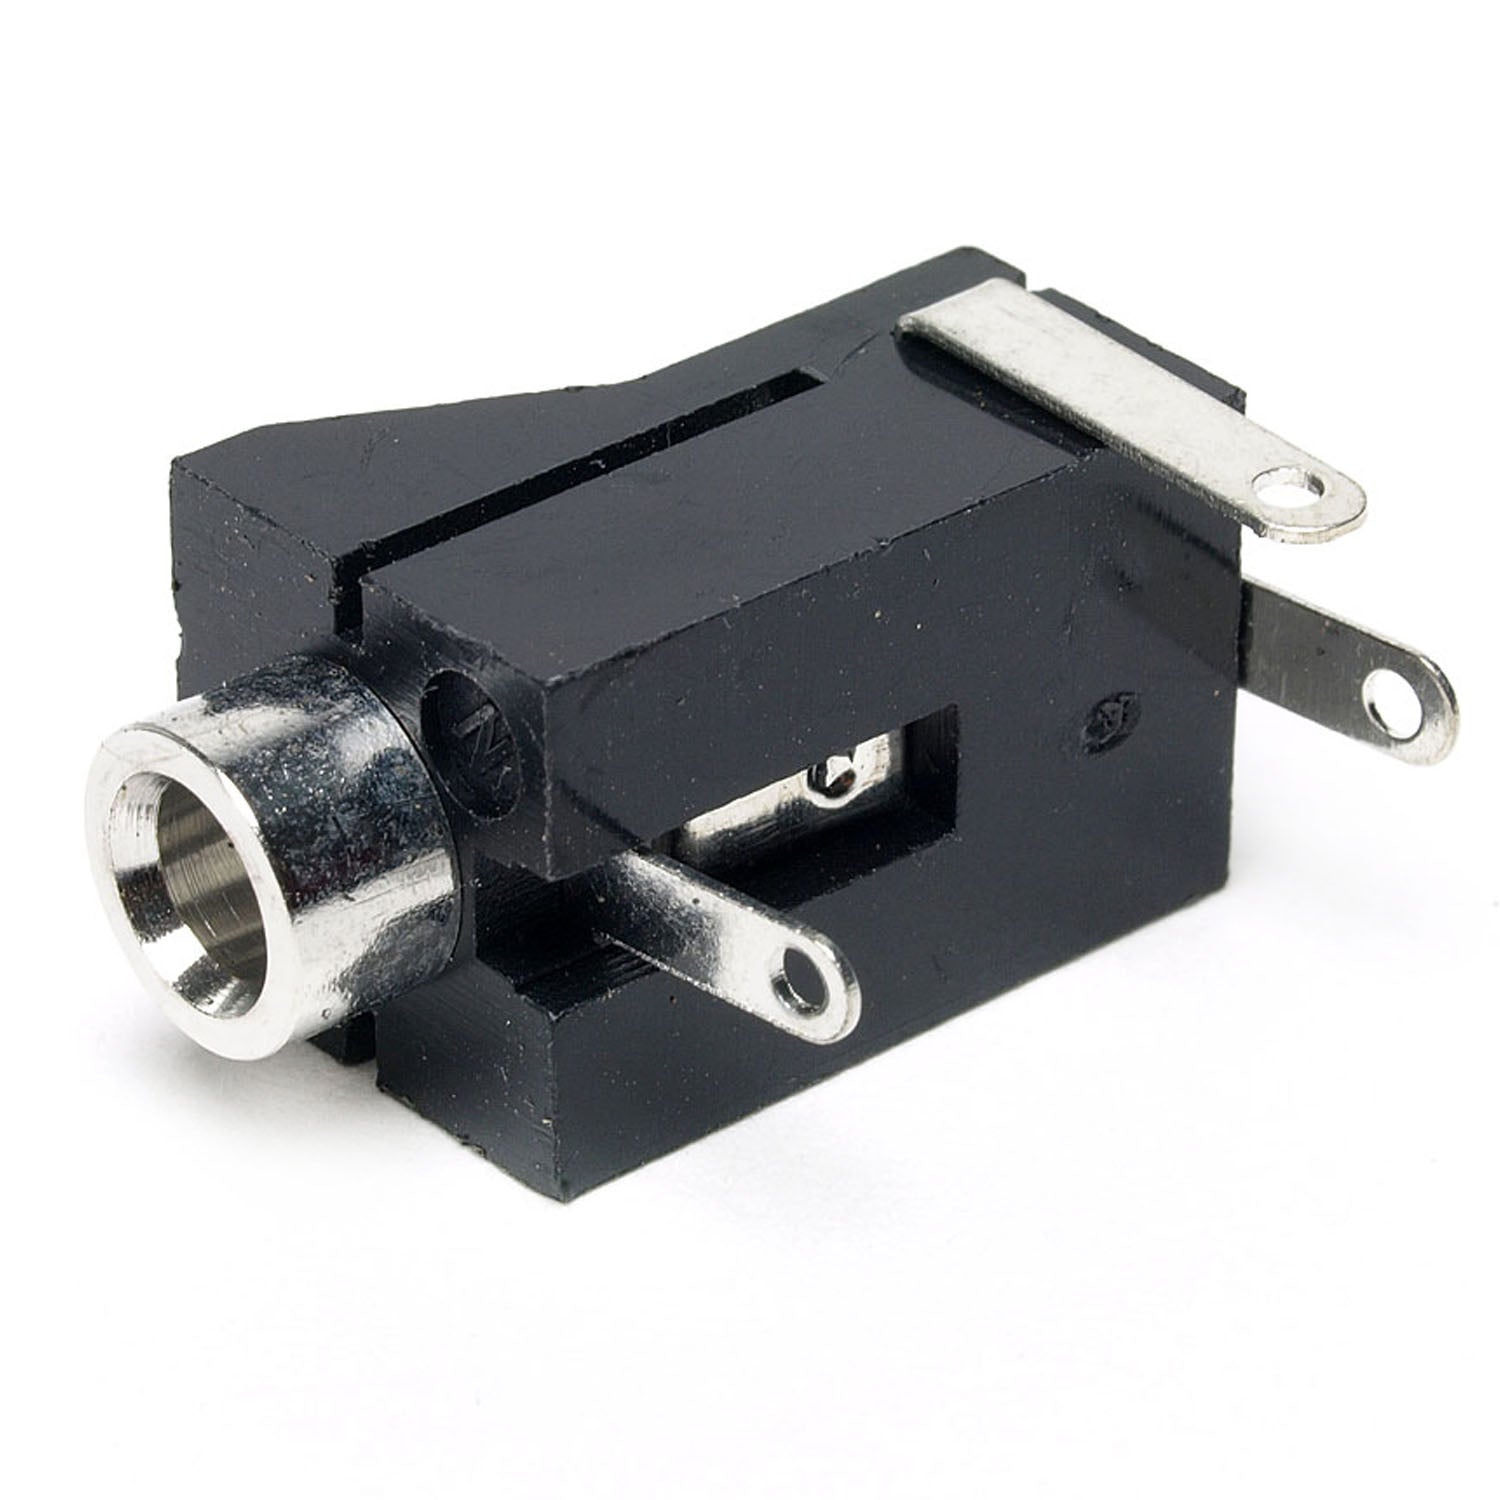 7-JC2420 3.5mm Mono jack open chassis